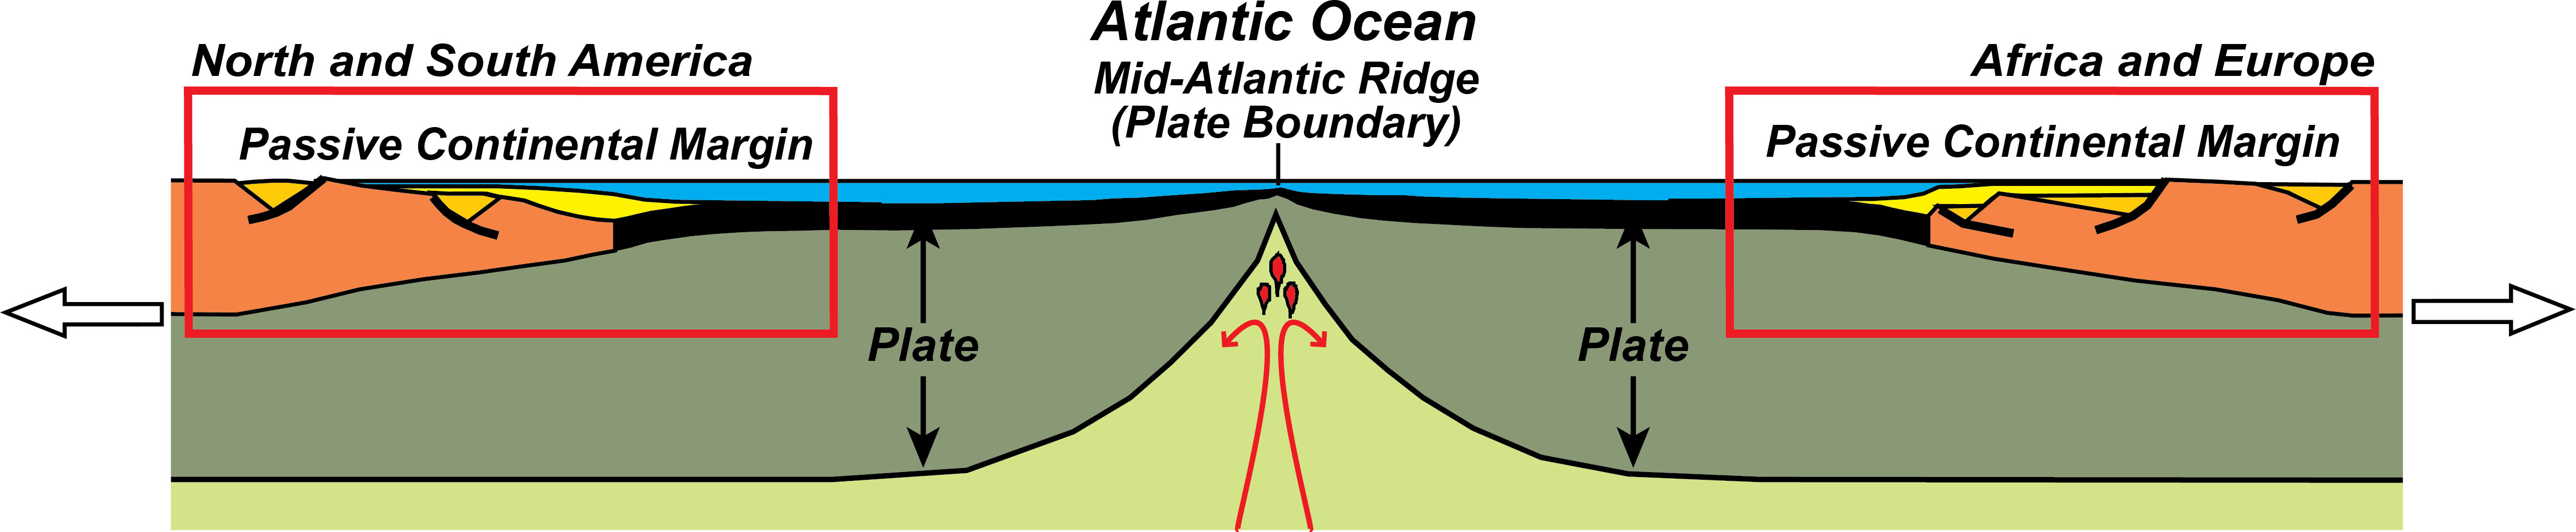 Divergent Plate Boundary Passive Continental Margins Geology